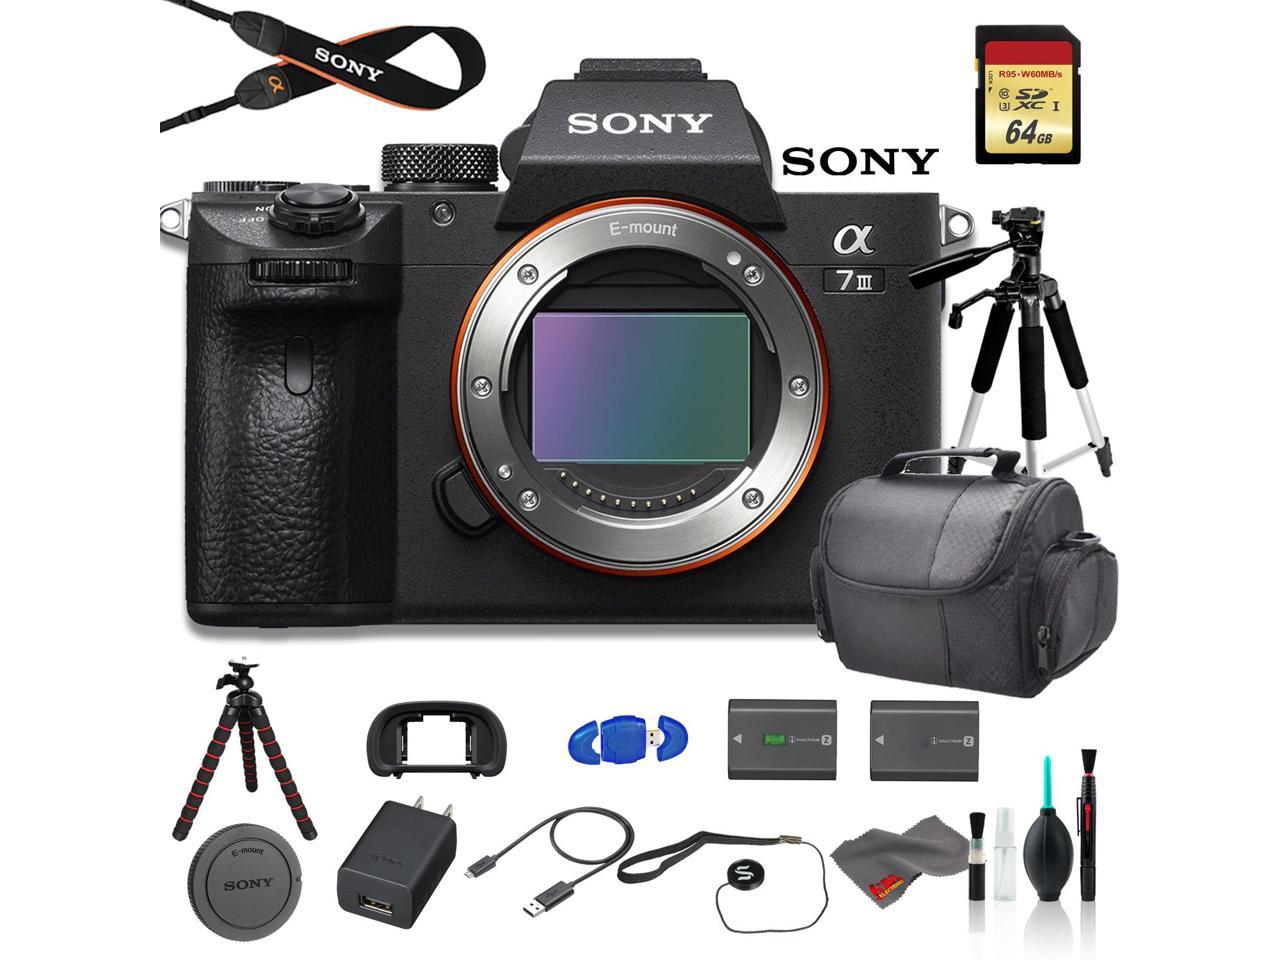 Sony Alpha a7 III Mirrorless Digital Camera (Body Only) Bundle - With Bag, Tripod, Extra Battery, 64GB Memory Card, Memory Card Reader and More